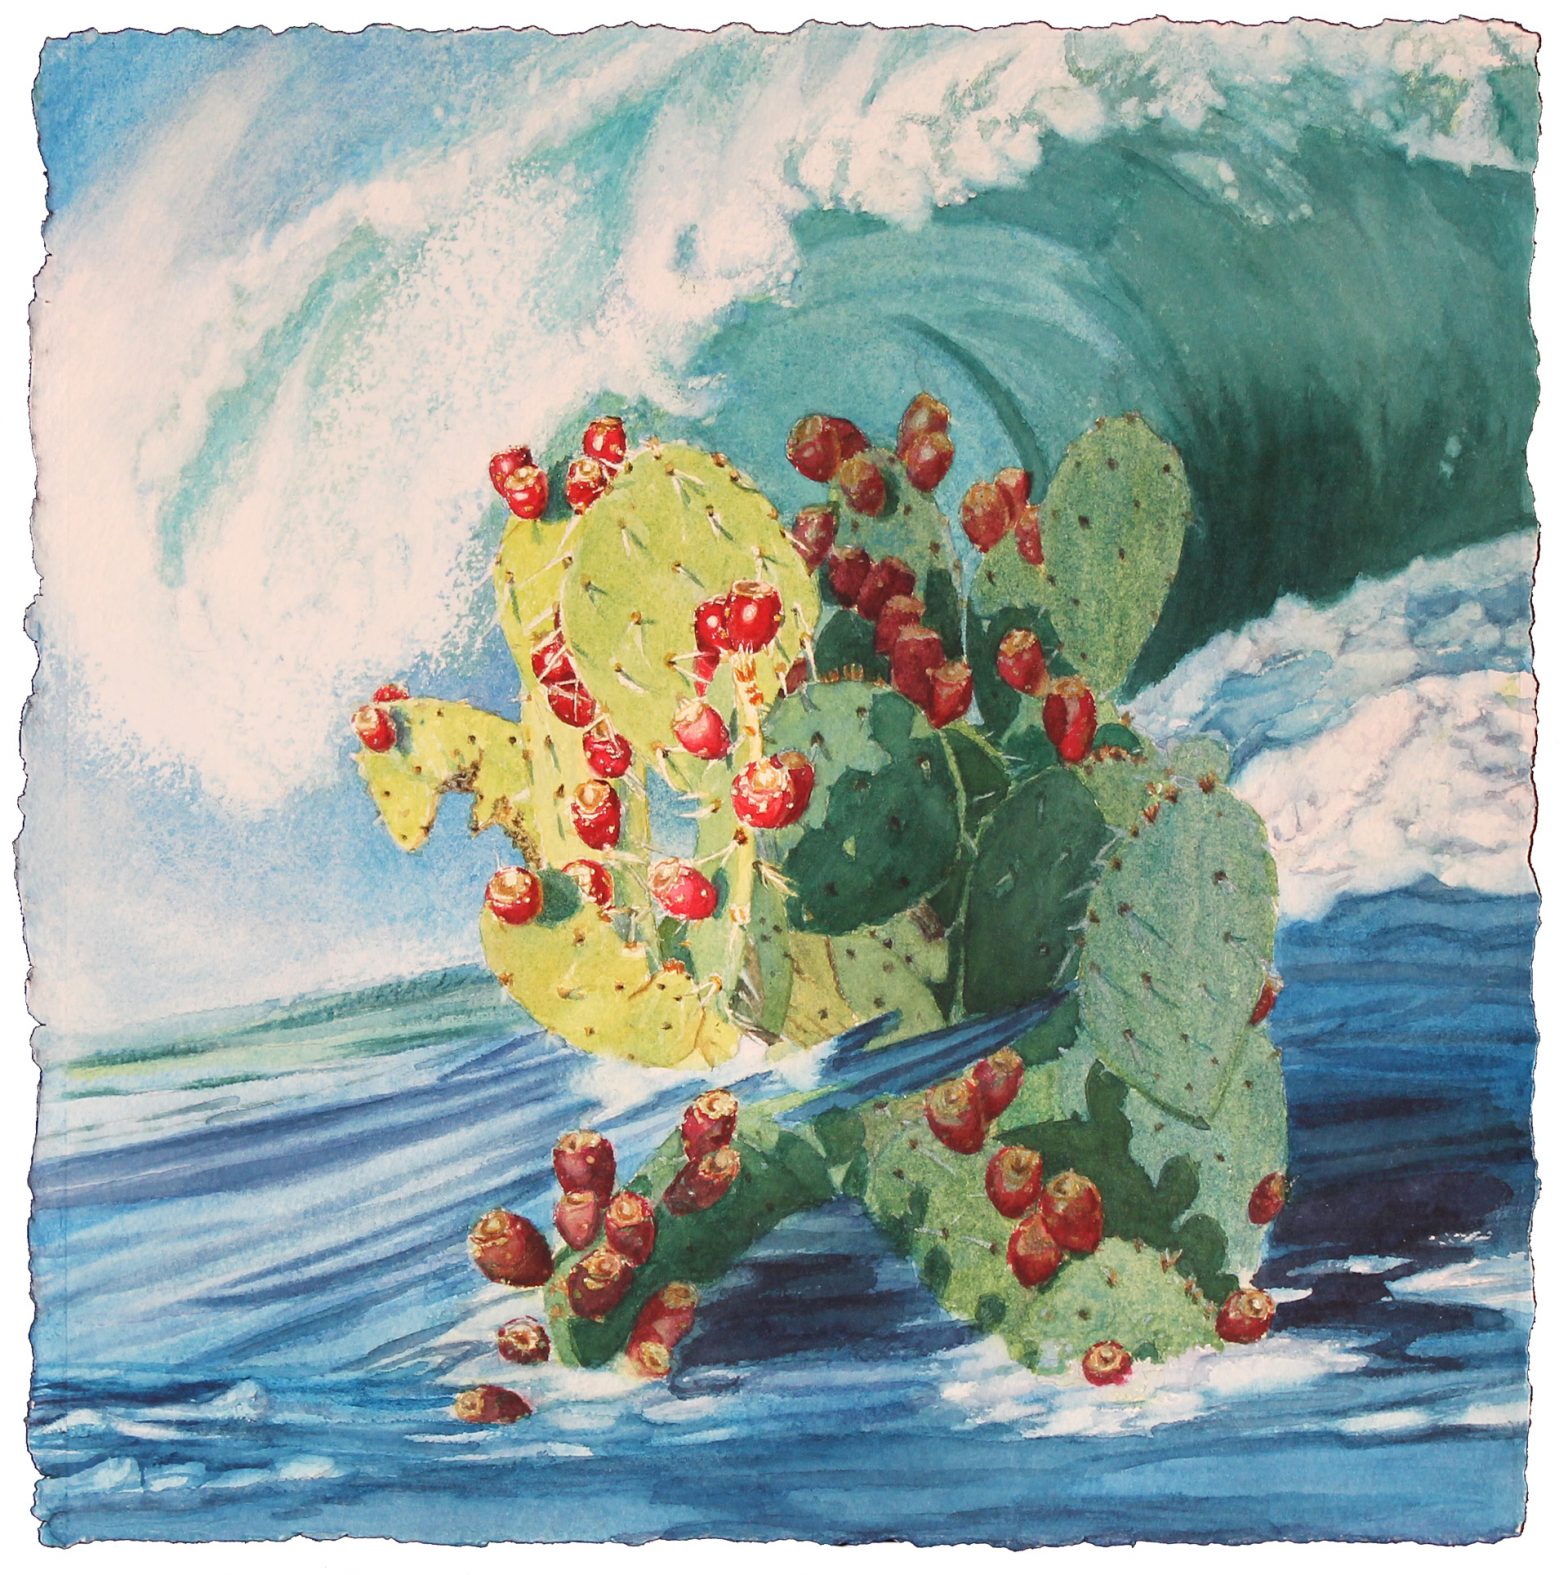 Cactus Catches a Wave Watercolor Painting